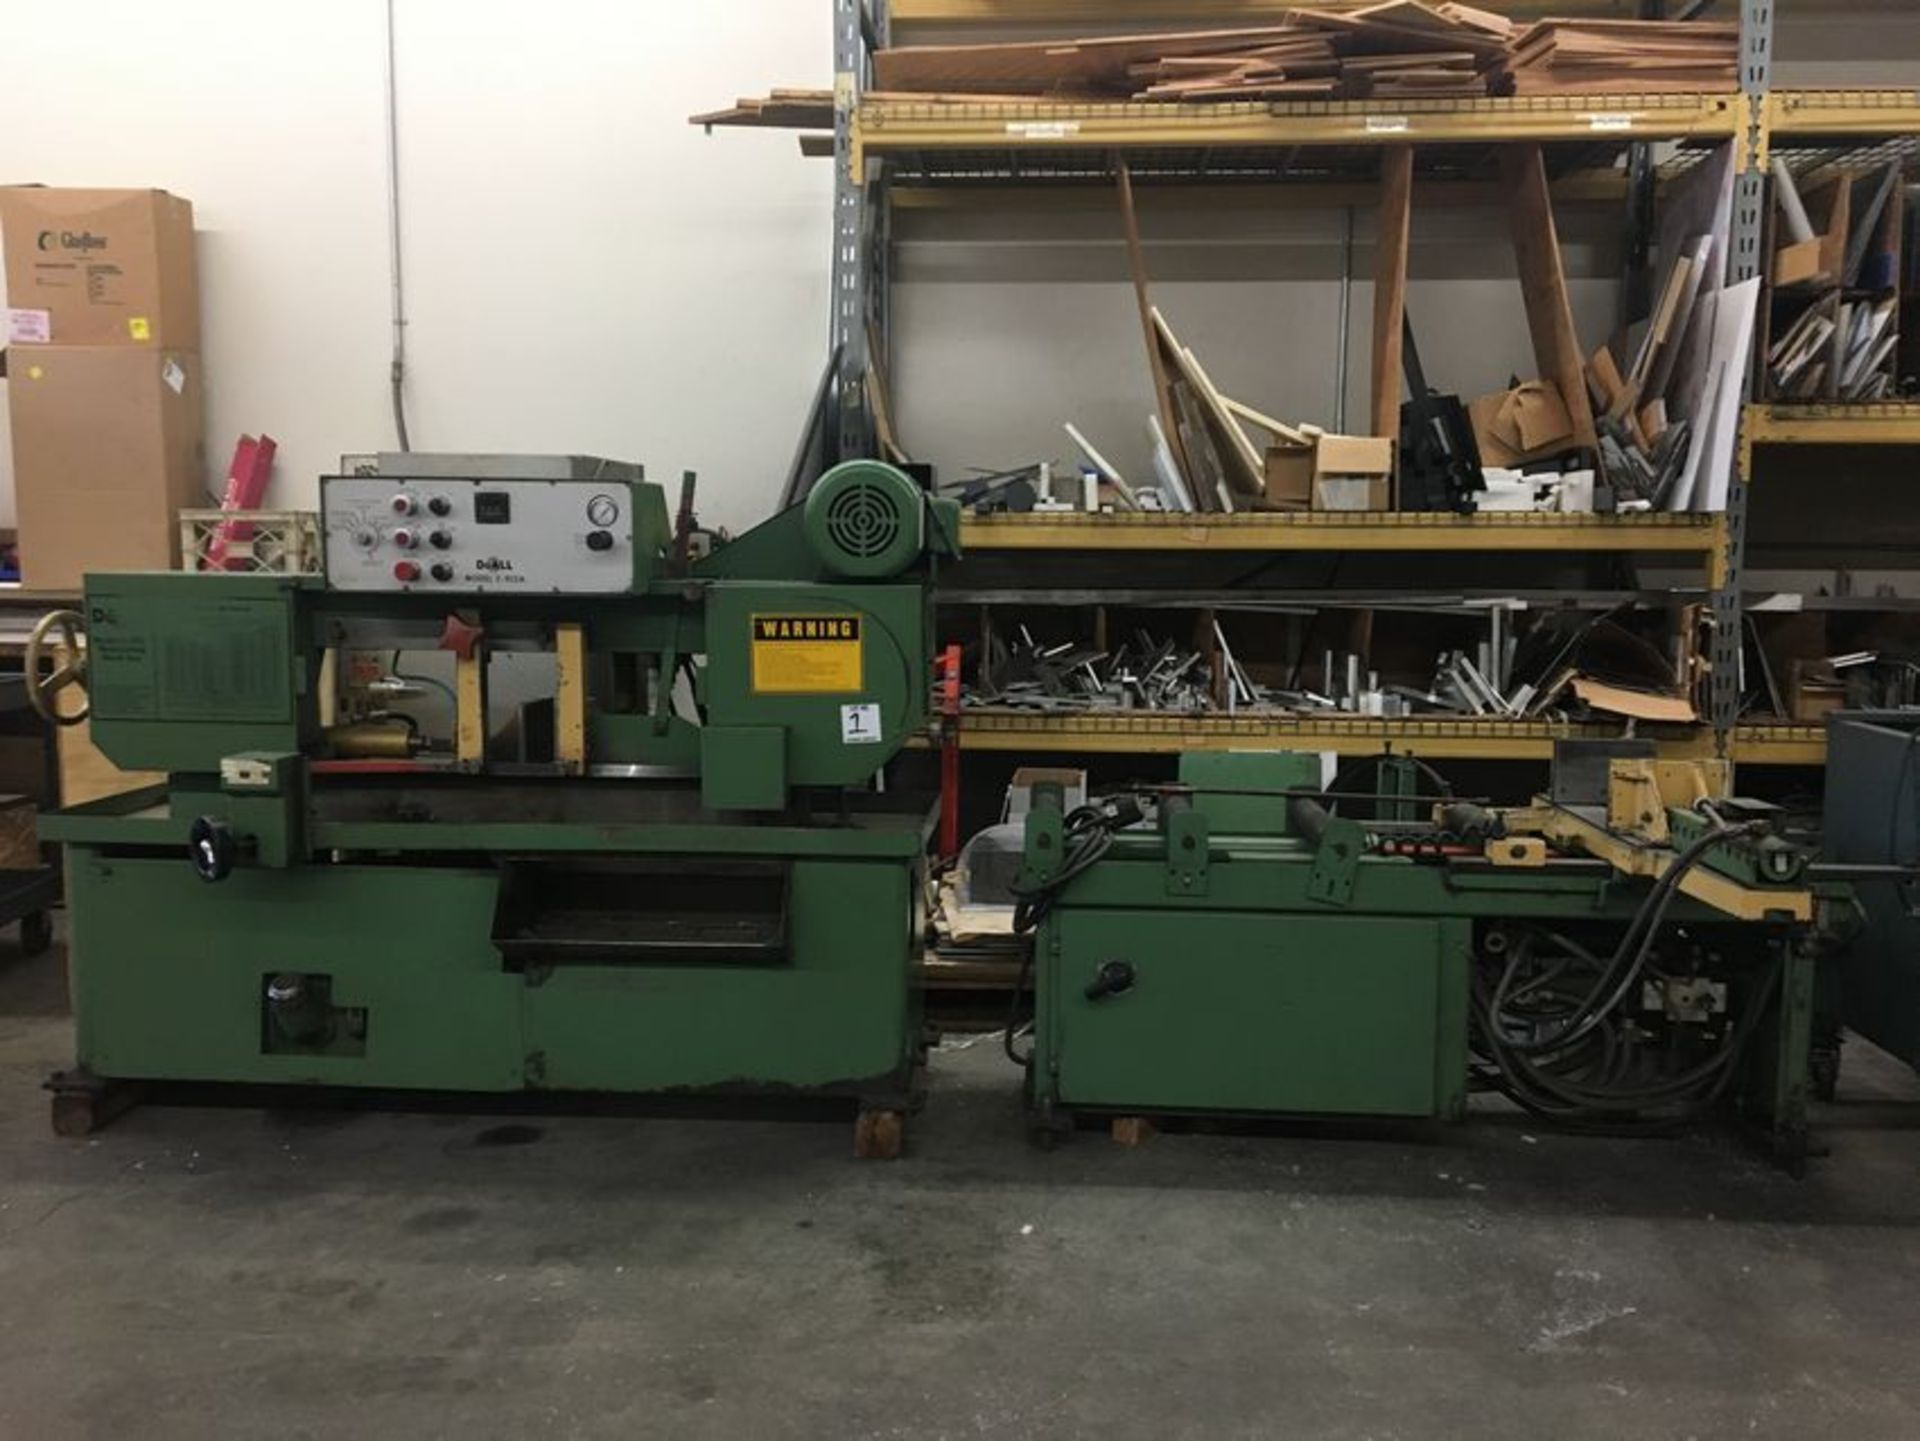 1985 do all c-912A automatic bandsaw -9” H x 12” 1” x ,146-148” blade size, 60-360 FPM Blade